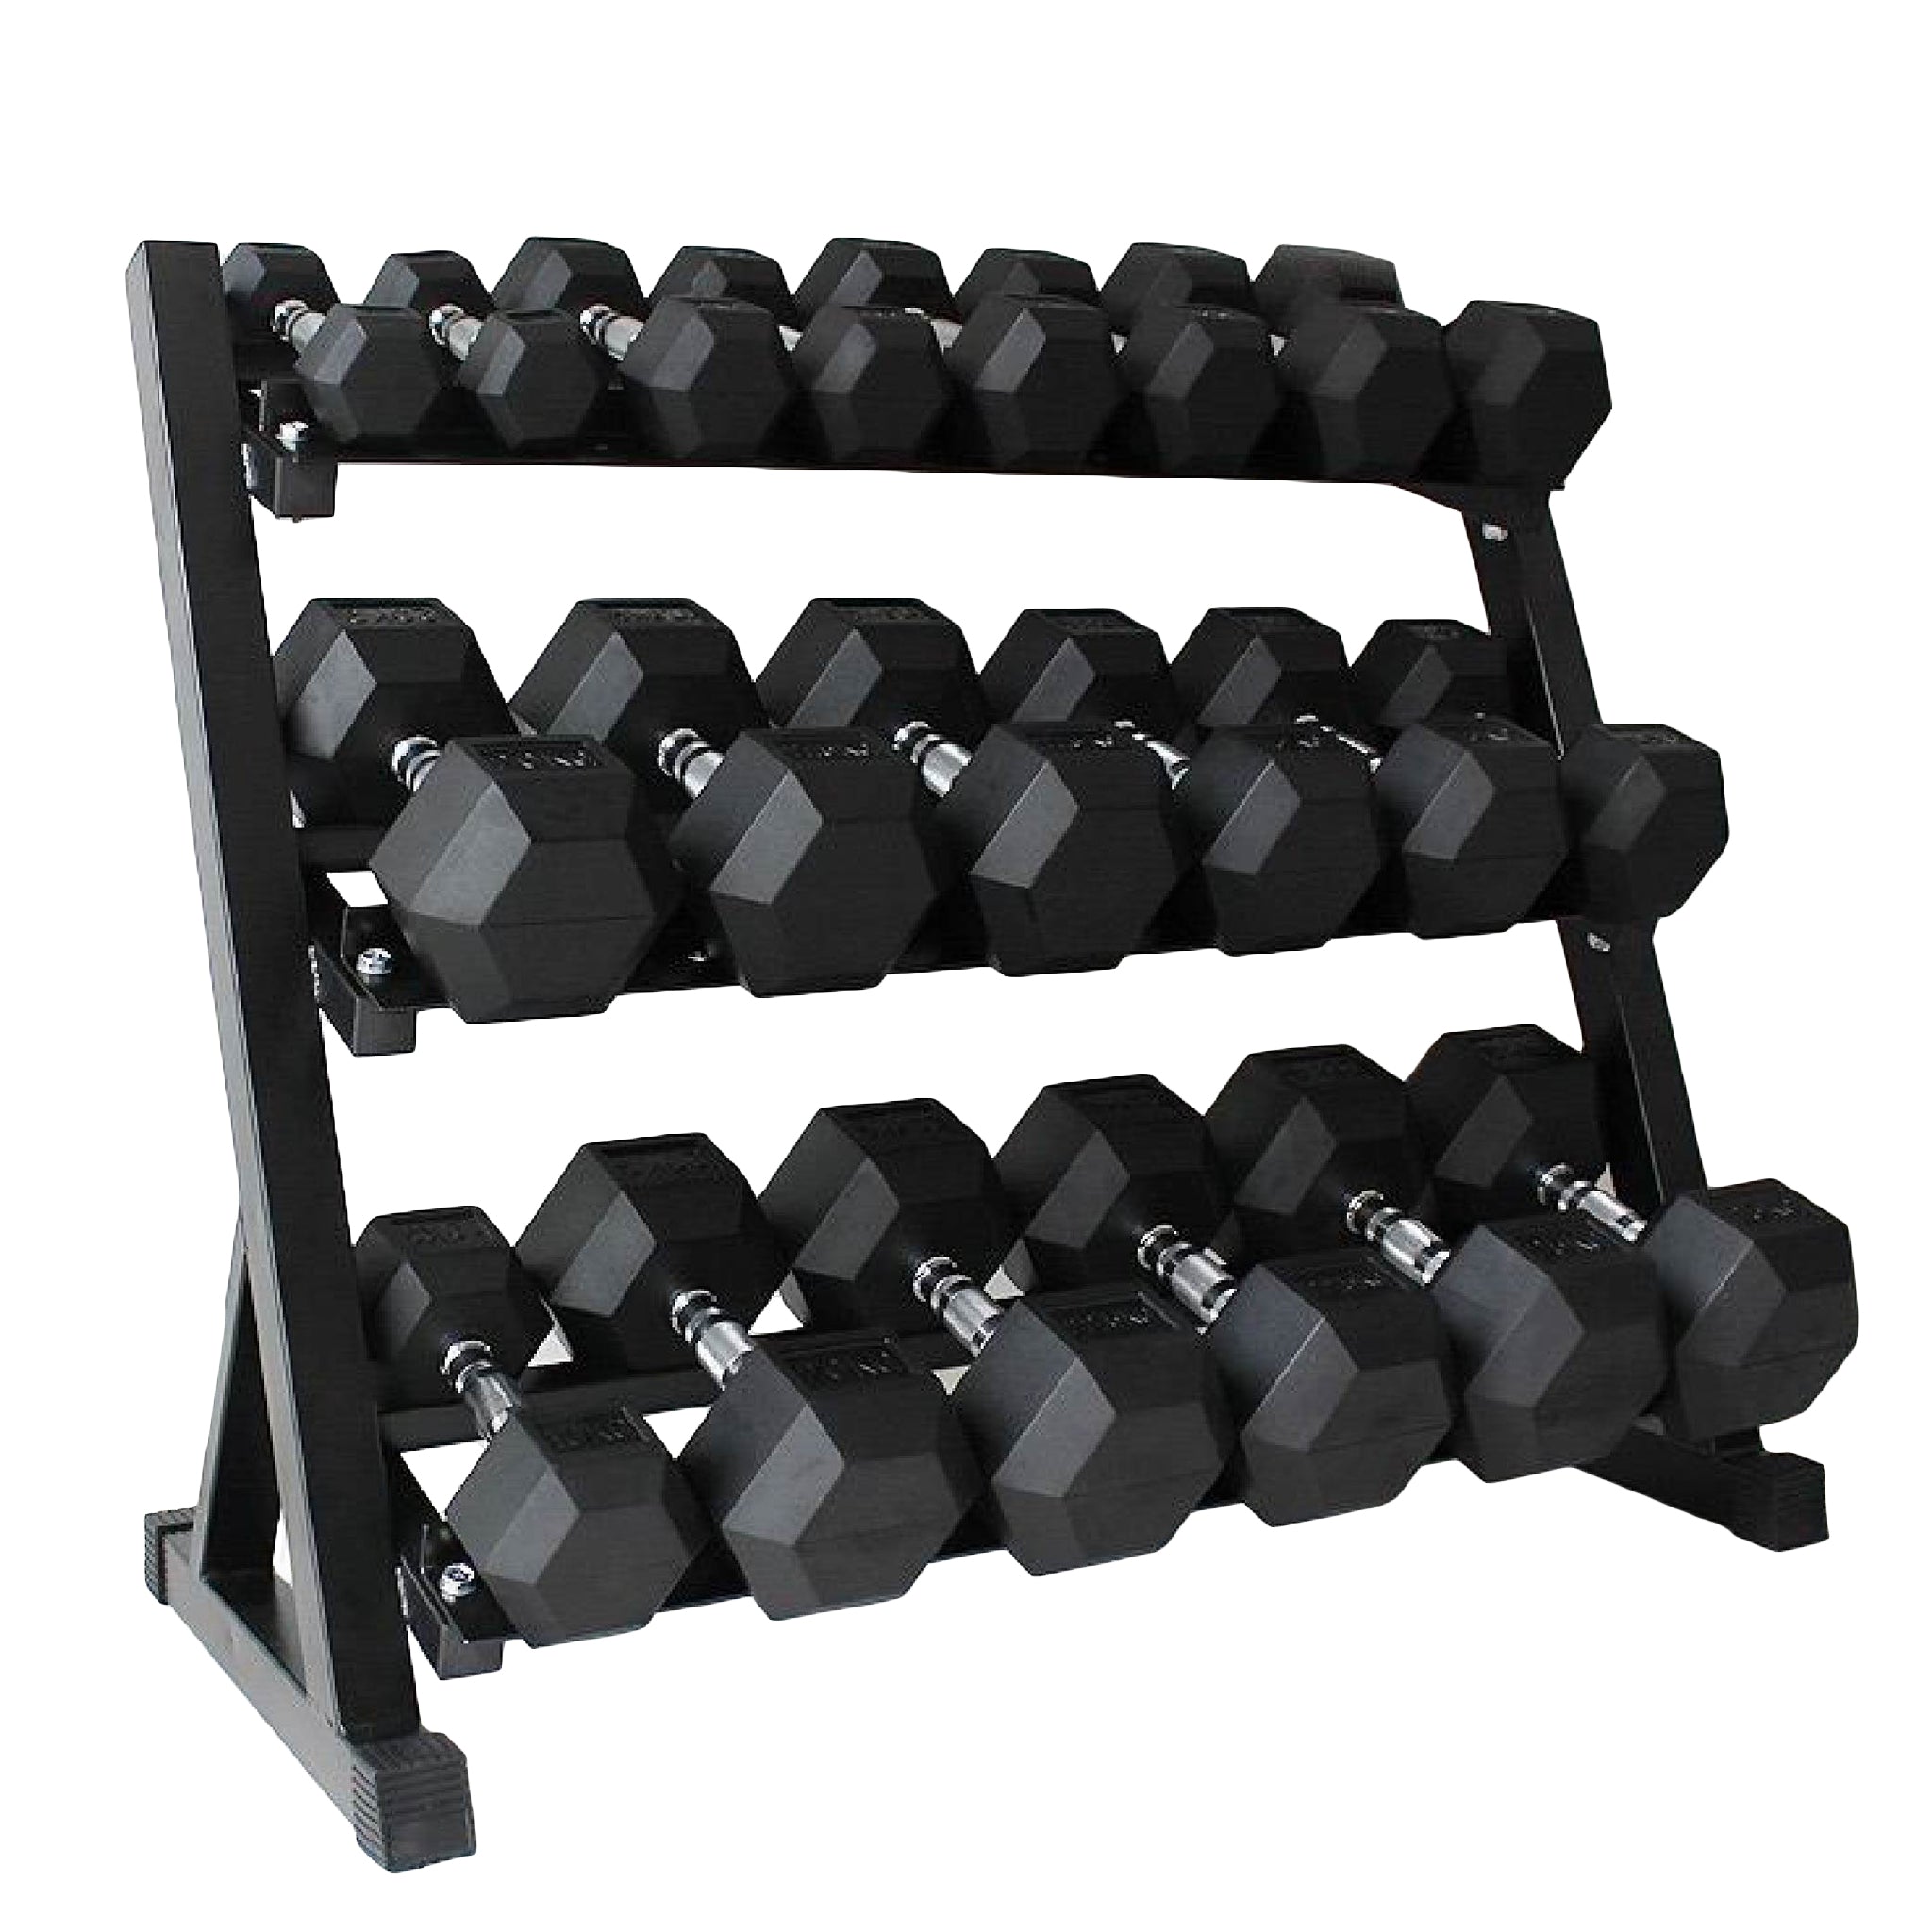 1-50kg Rubber Hexagonal Dumbbell Set With Two of 3-Tiers Dumbbell Rack - iworkout.com.au